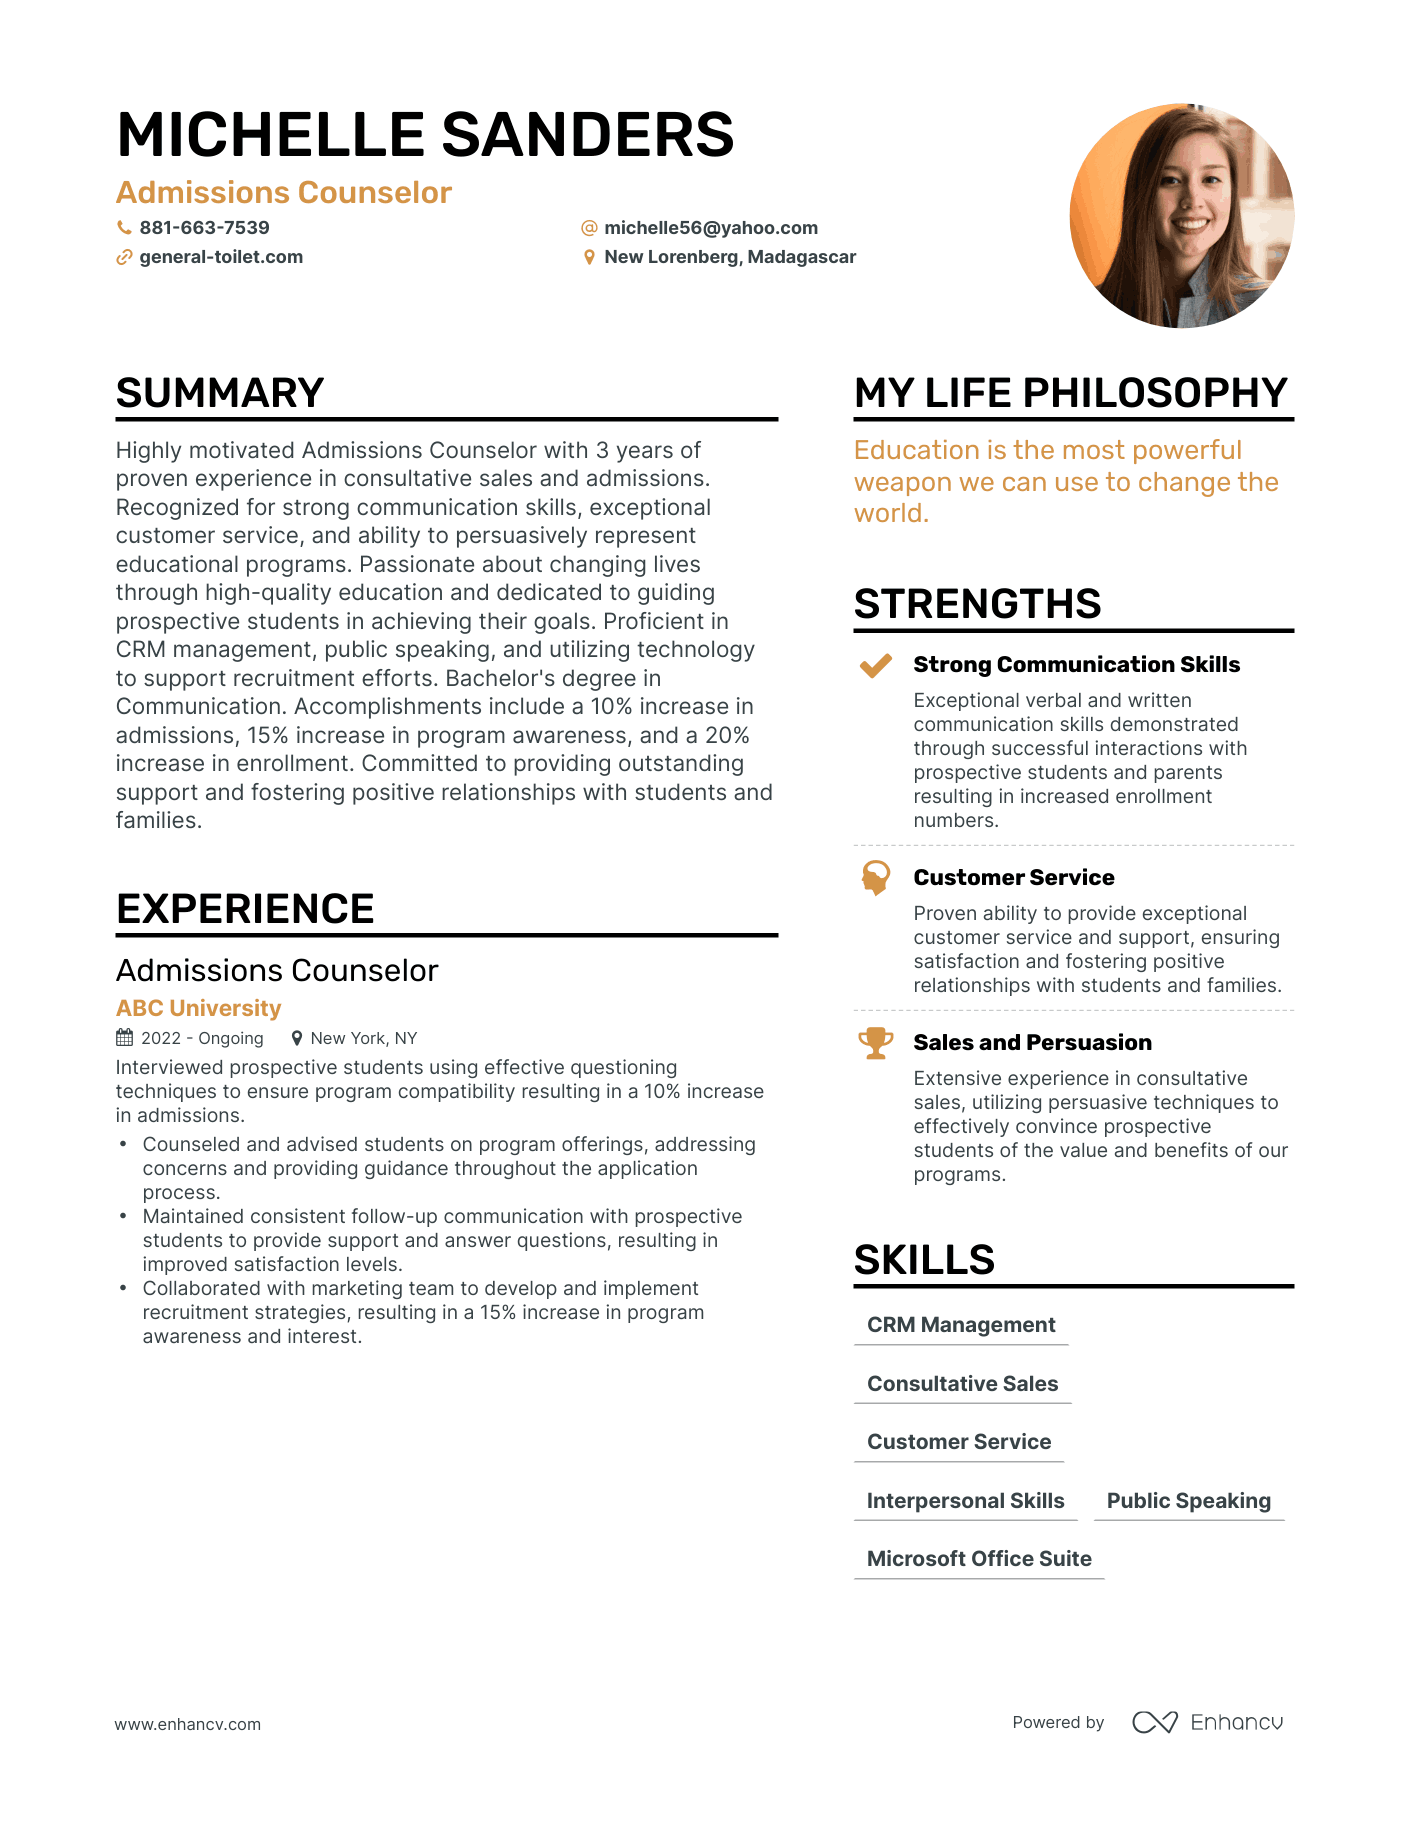 Admissions Counselor resume example